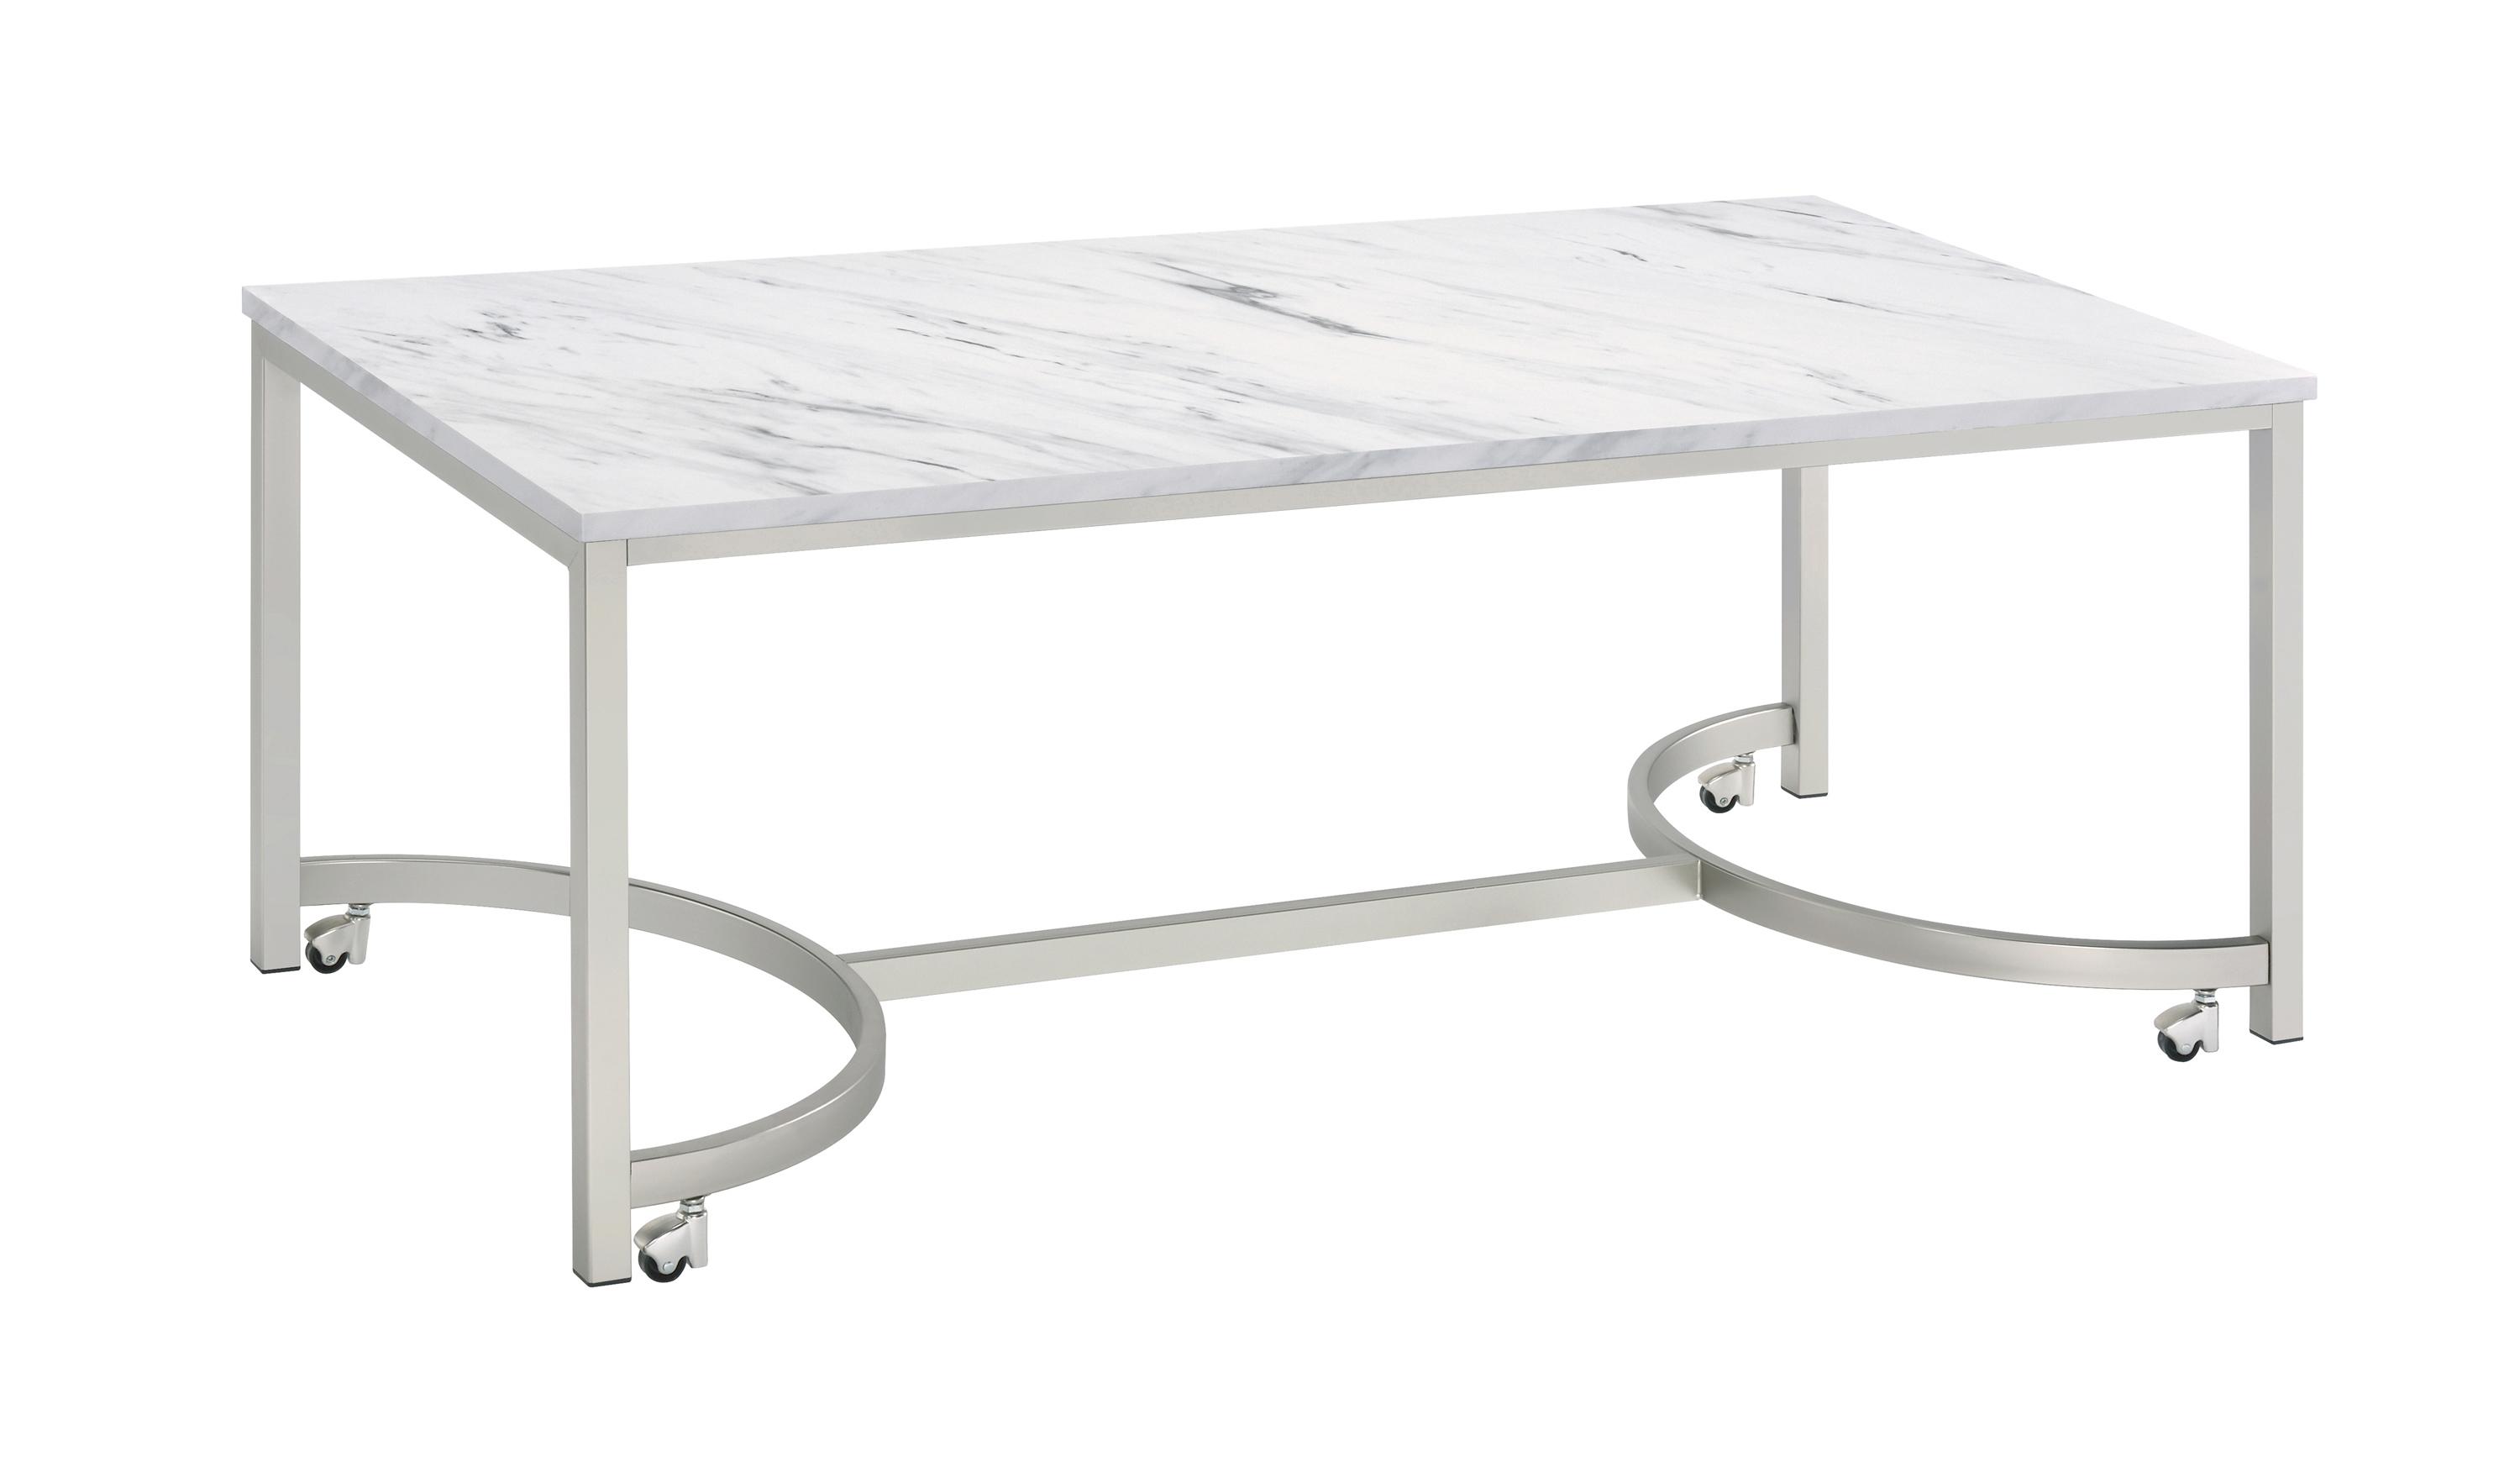 Contemporary Coffee Table 721868 721868 in White 